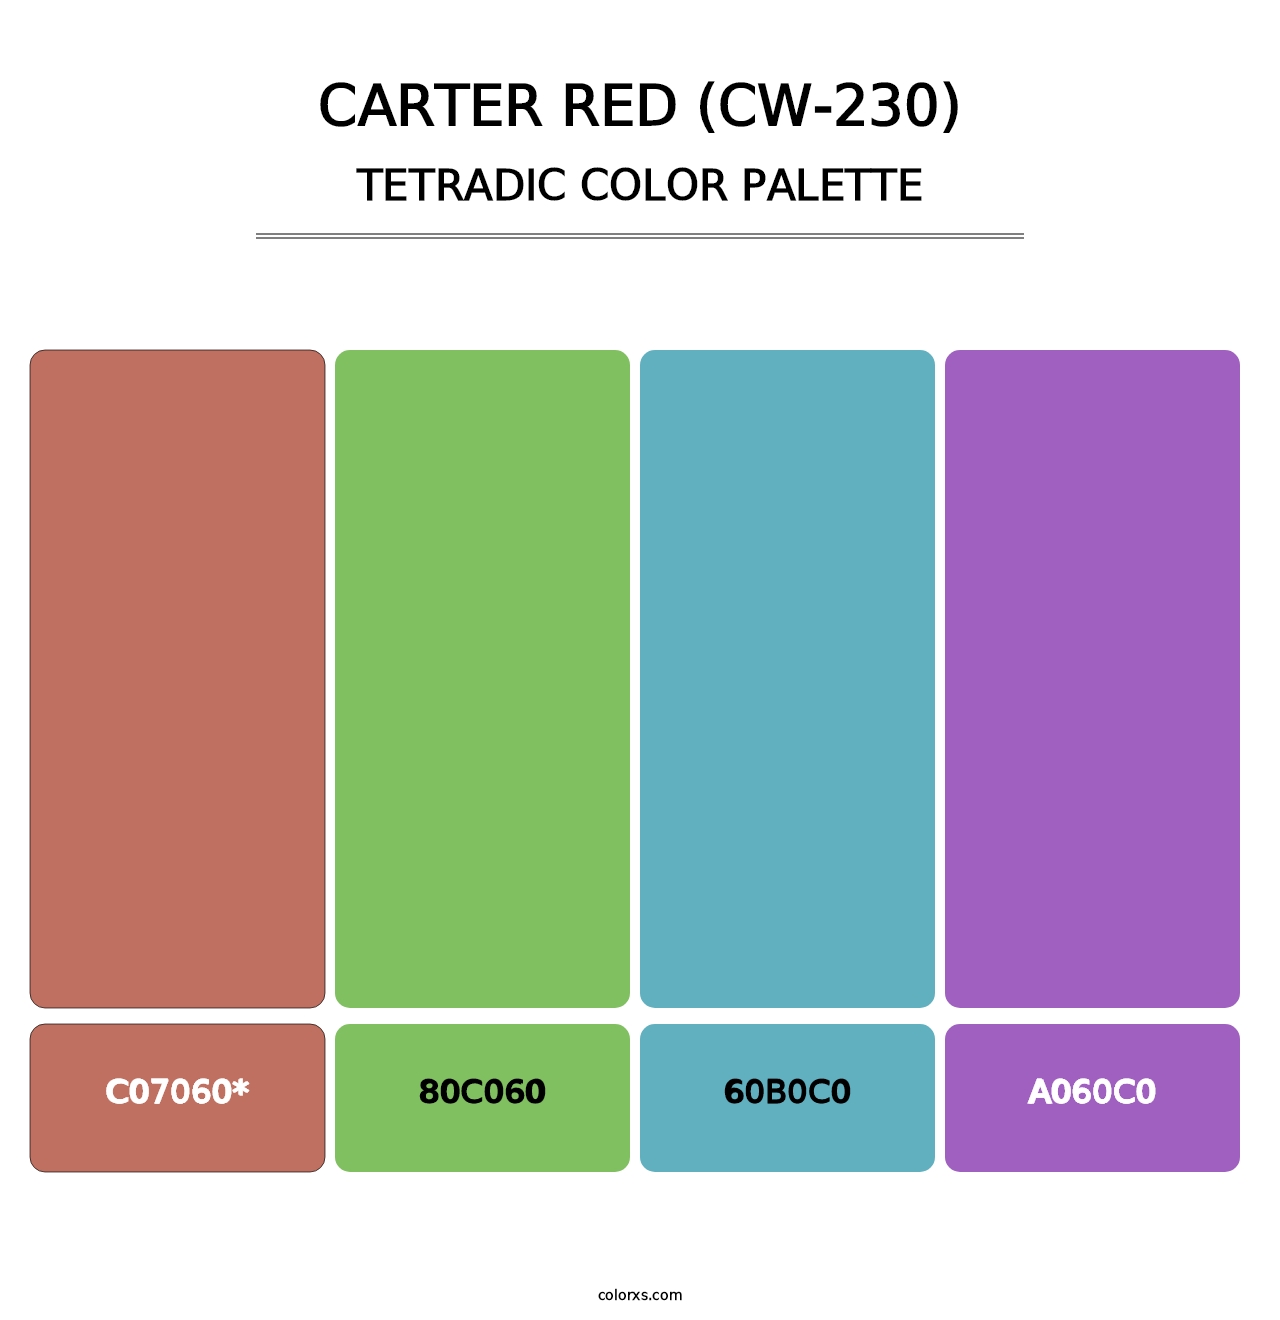 Carter Red (CW-230) - Tetradic Color Palette